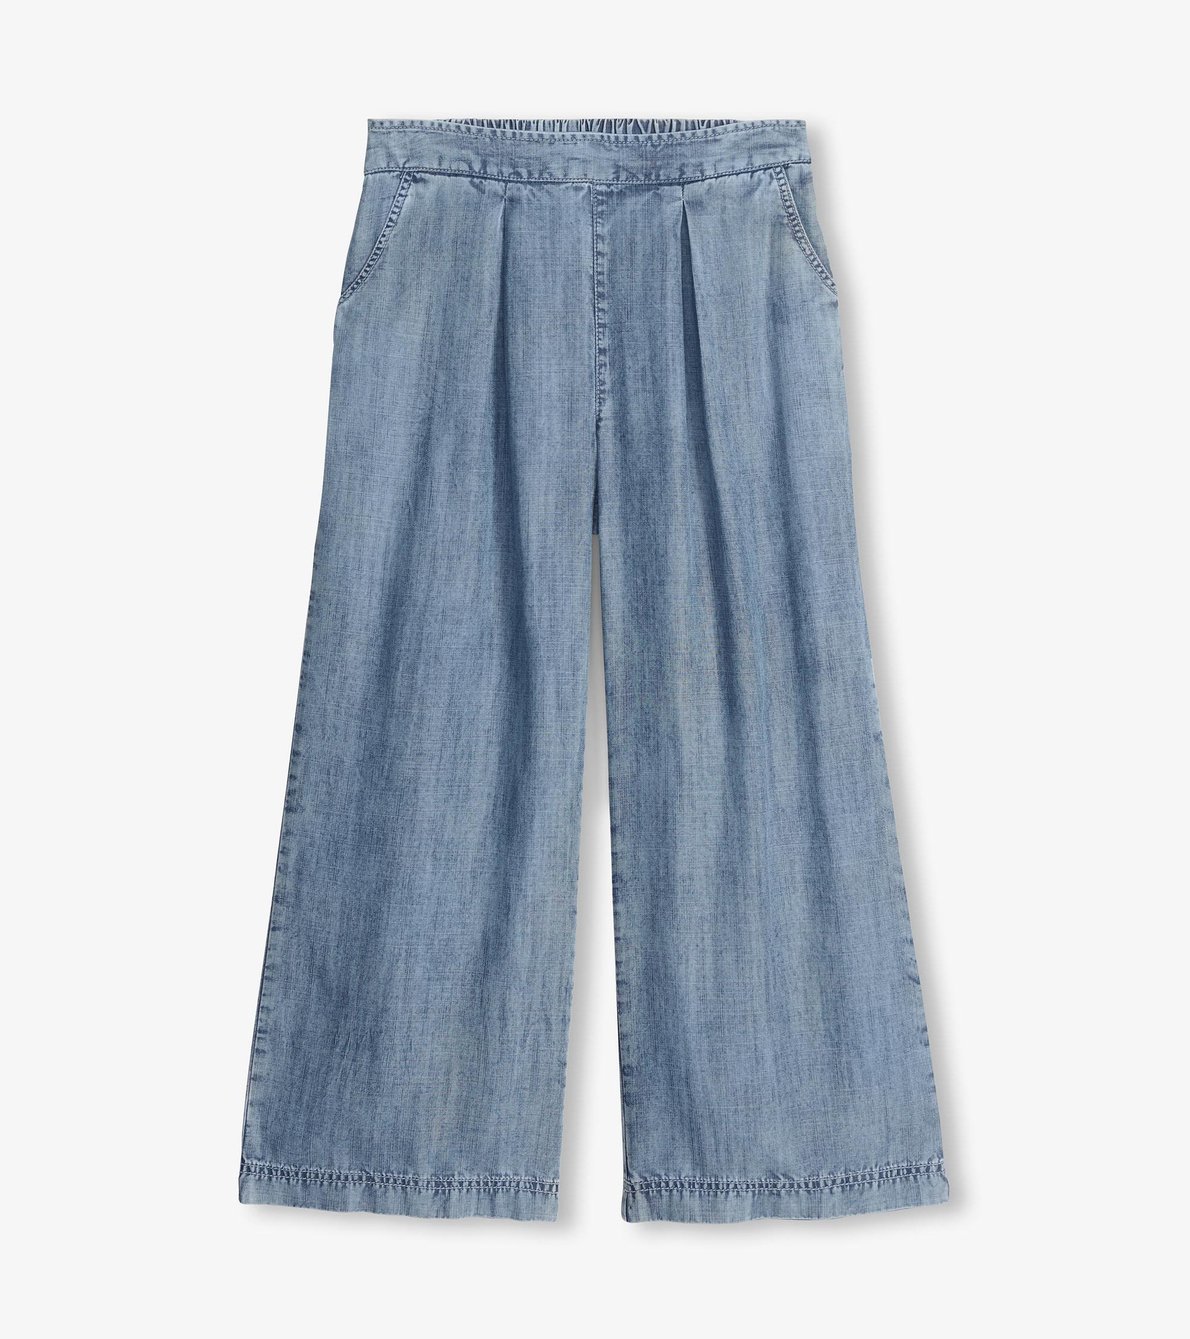 View larger image of Cropped Wide Leg Pants - Blue Acid Rinse